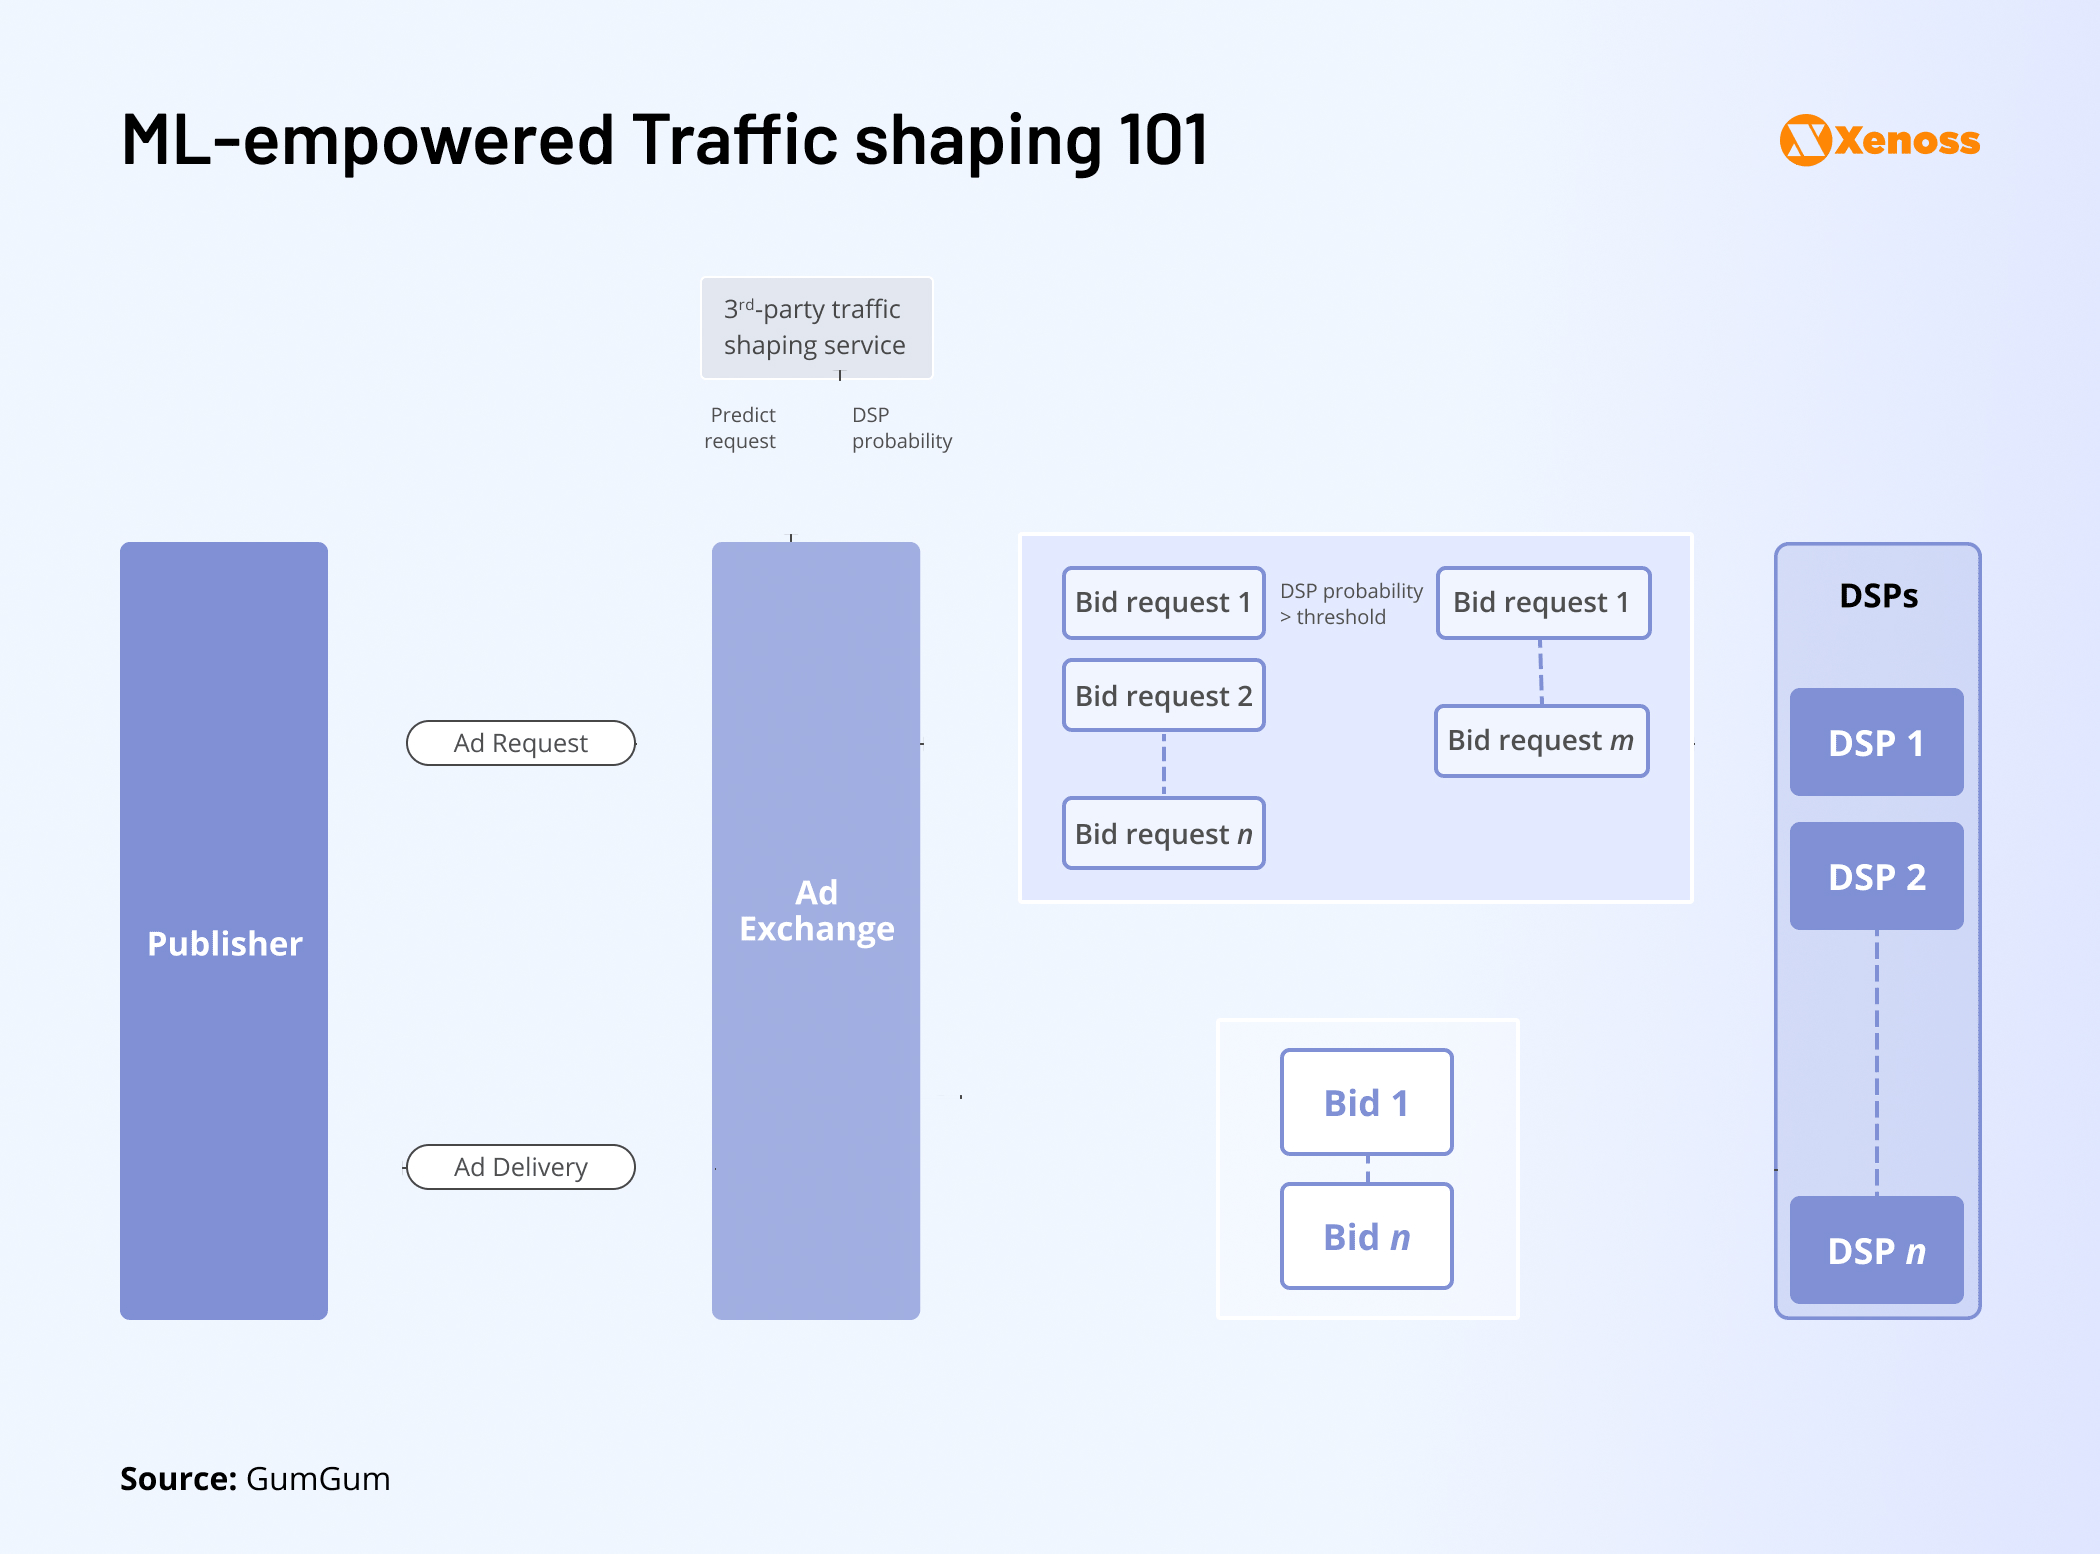 Use of machine learning for traffic shaping